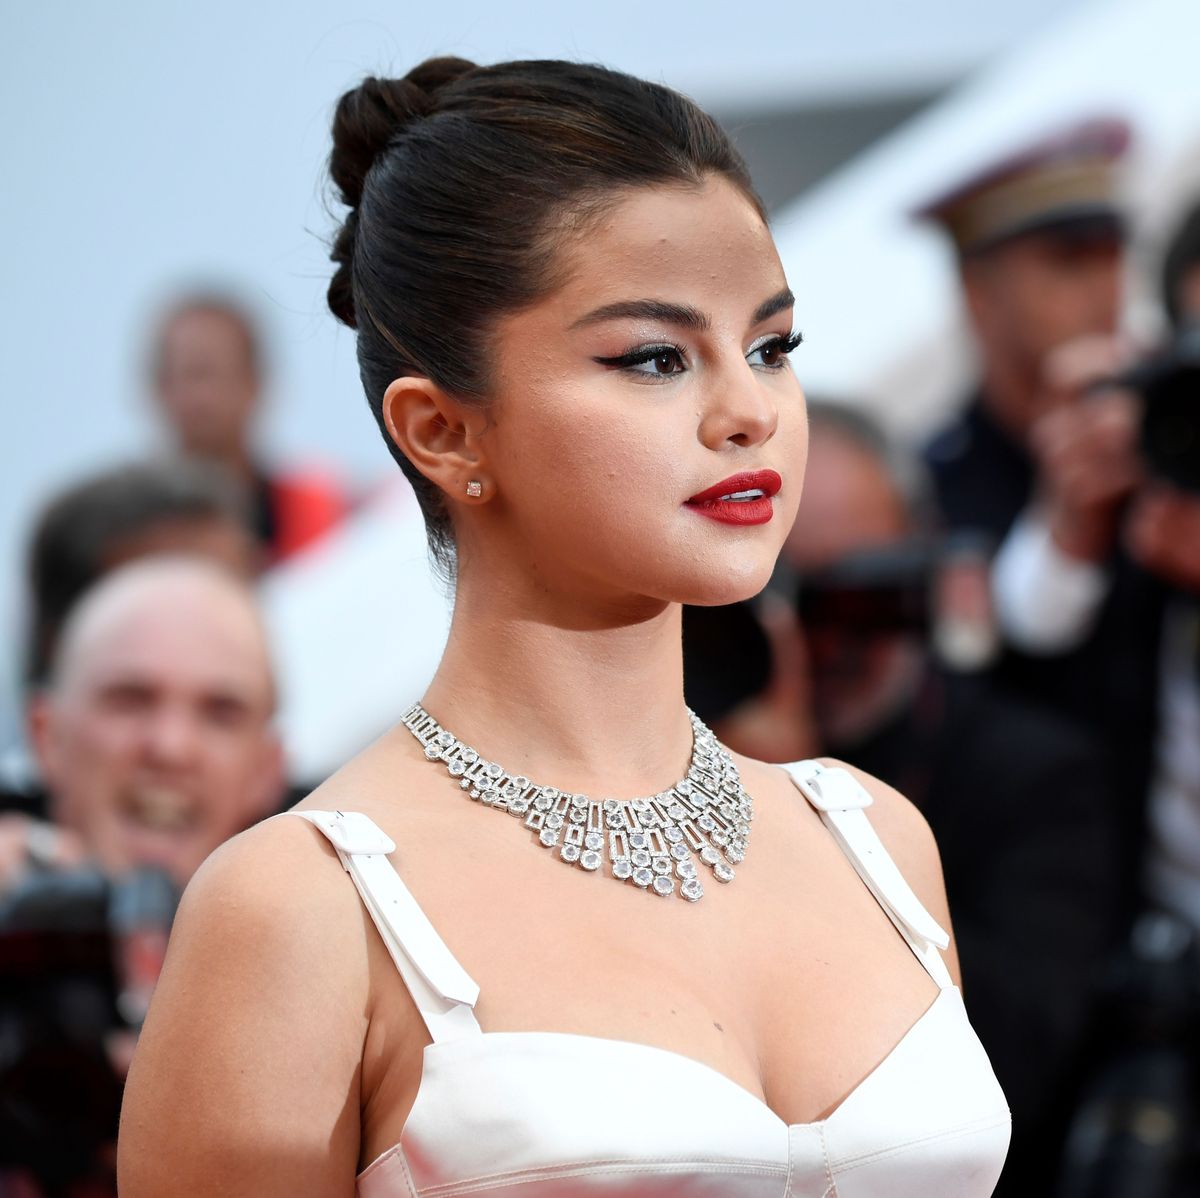 Selena Gomez on Losing Control of Her Personal Life and Justin Bieber Drama